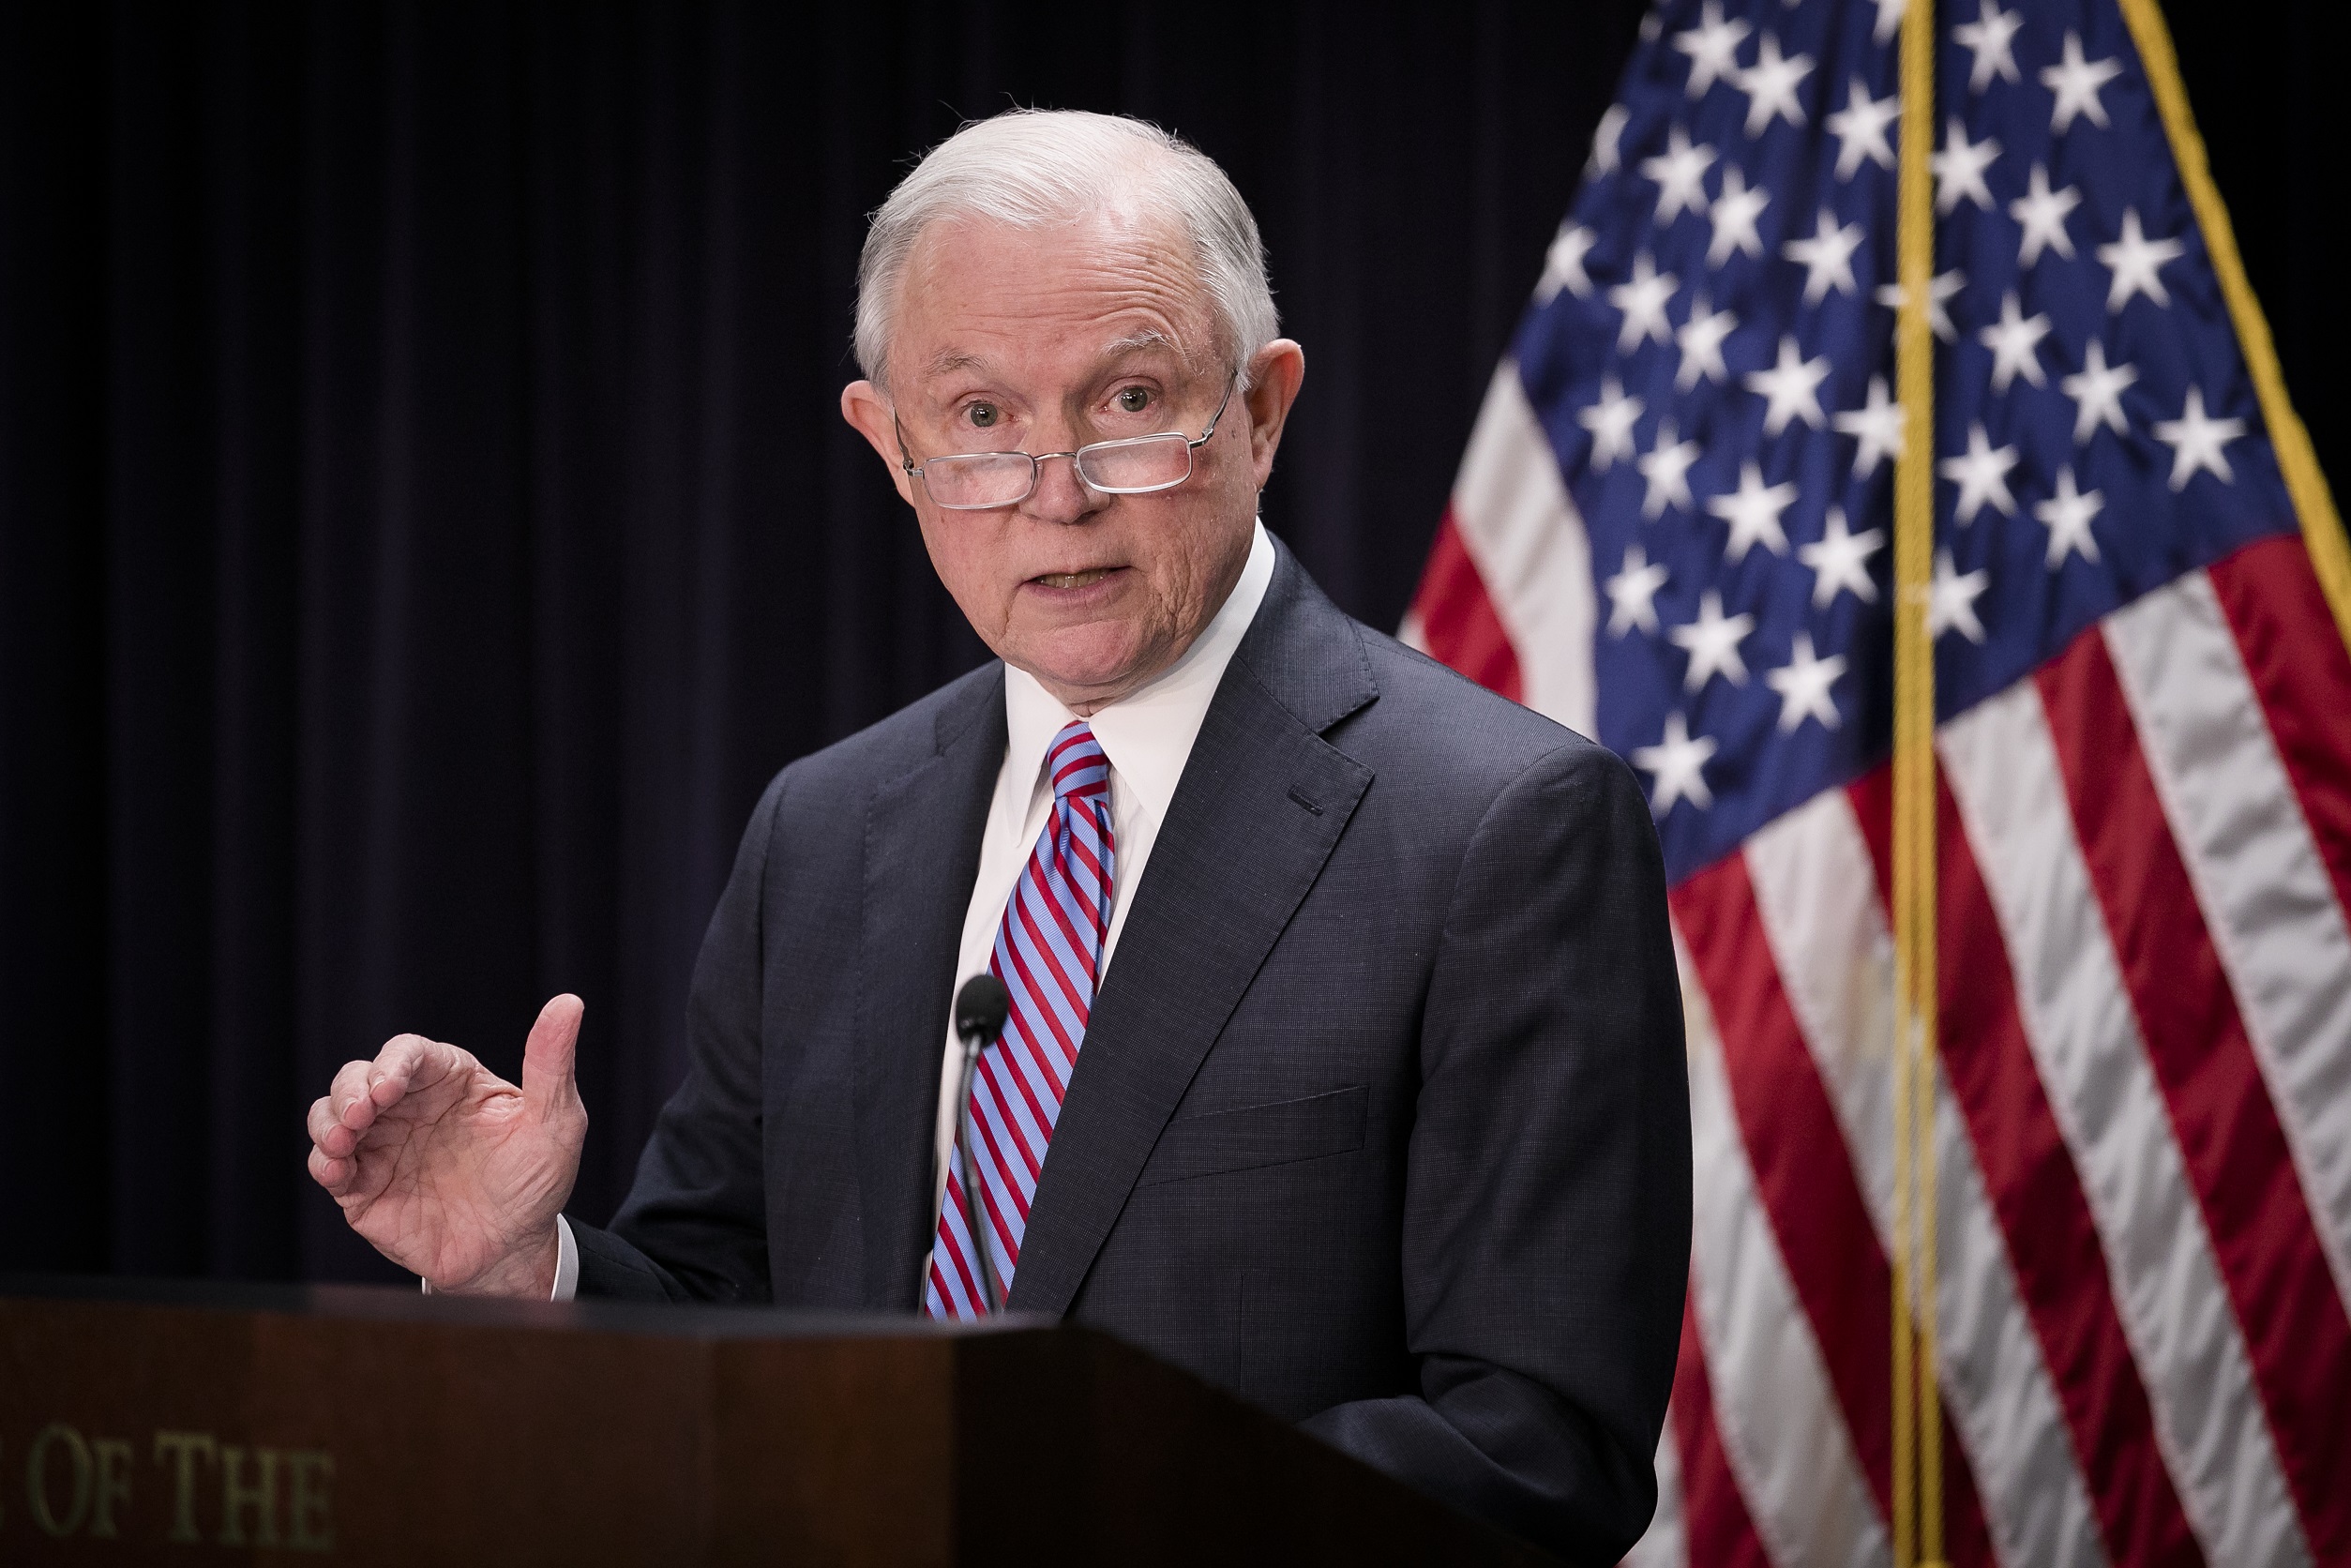 Attorney General Jeff Sessions at a press conference in Baltimore